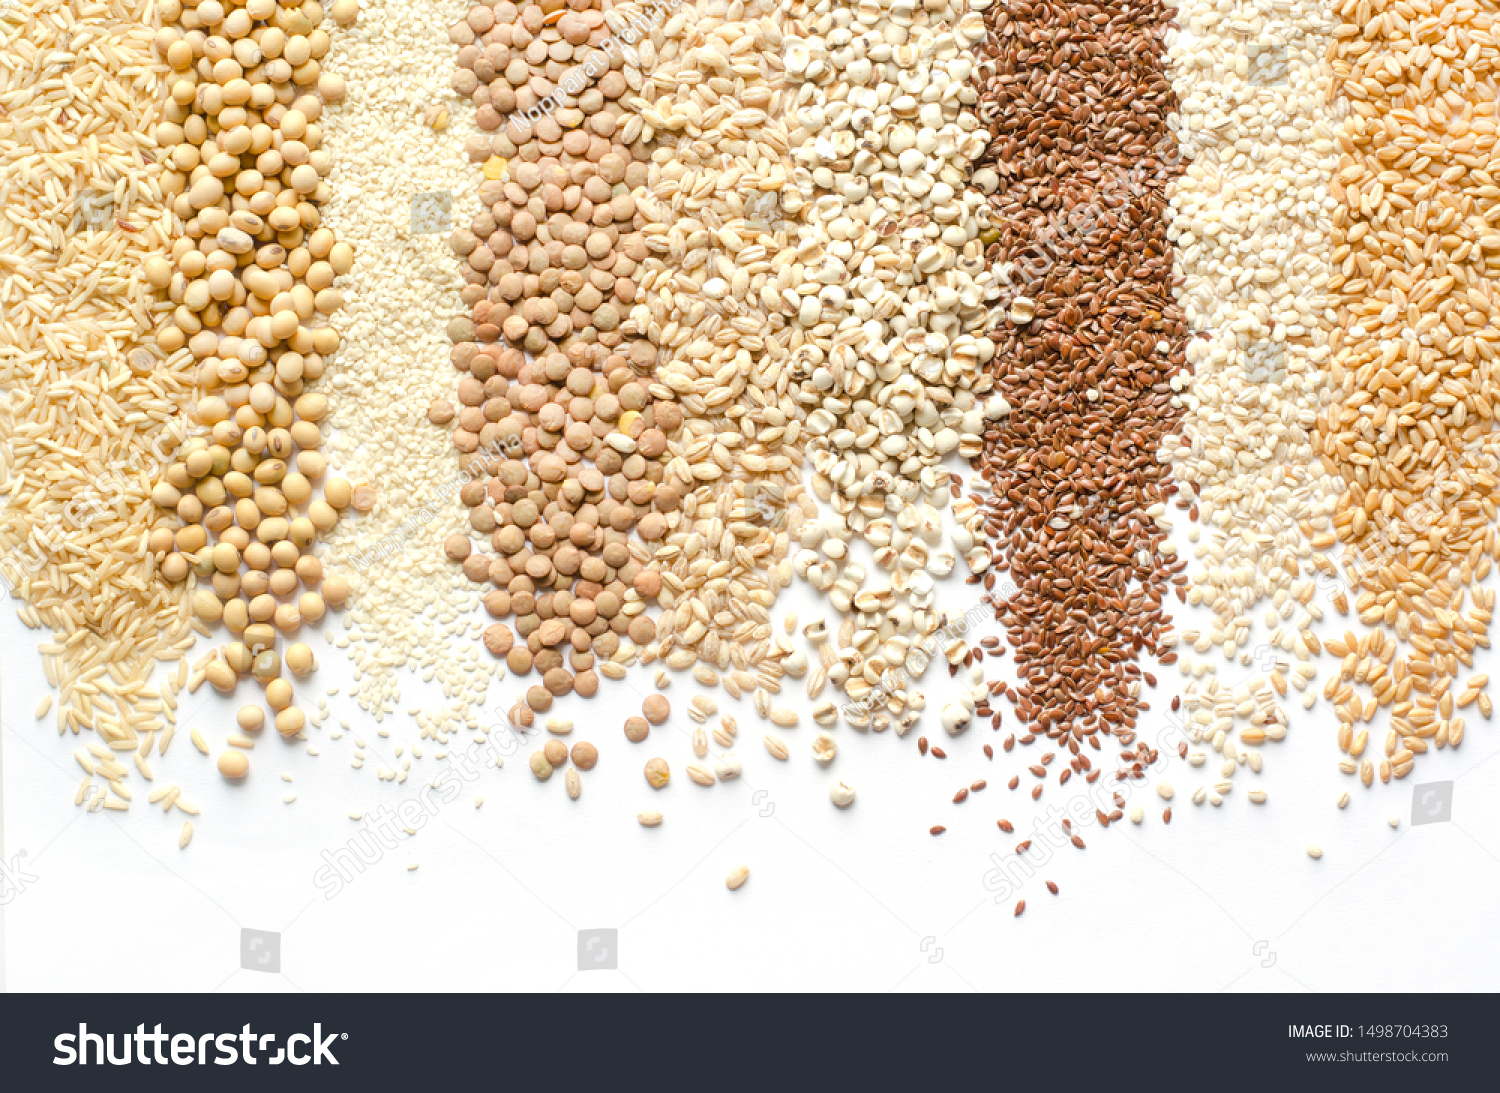 Variety kinds of natural organic cereal or grain seed in stripe shape on white background consisted of rice,soybean,sesame,lentils,wheat,barley,job's tear,flax seed,and pearl barley  #1498704383